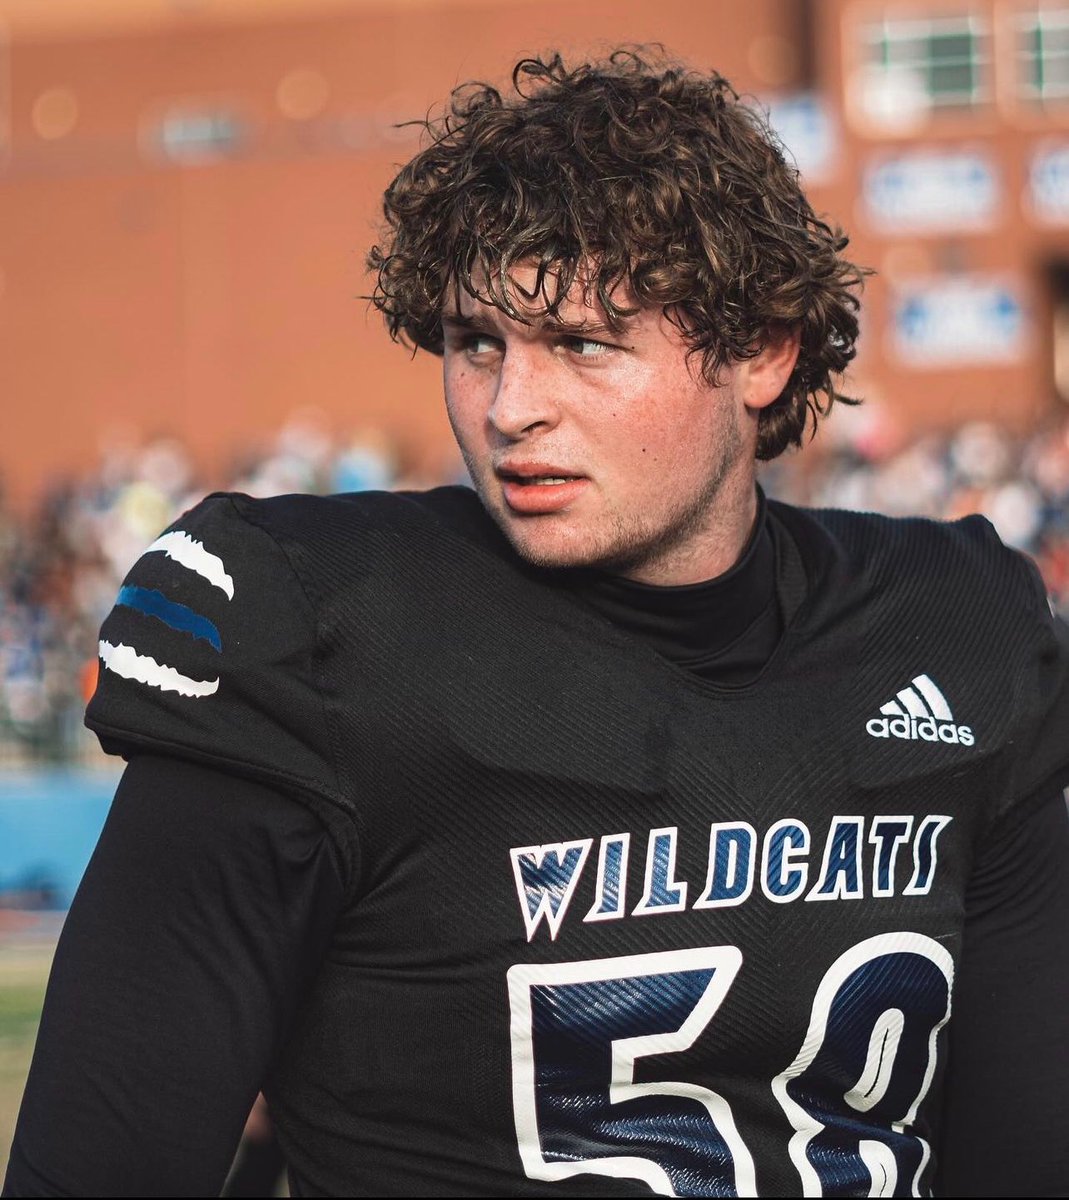 ⚫️Uncommitted 2024 Long Snapper⚫️ 6’1” 230 4.41 GPA All county, All conference, 2nd team all Charlotte, 2nd team all 4a Starting Center and Guard 4 year Varsity Lacrosse player 2 current D1 offers HKA top 40 Game Film: hudl.com/v/2MWgPi @HKA_Tanalski @TheLake_FB